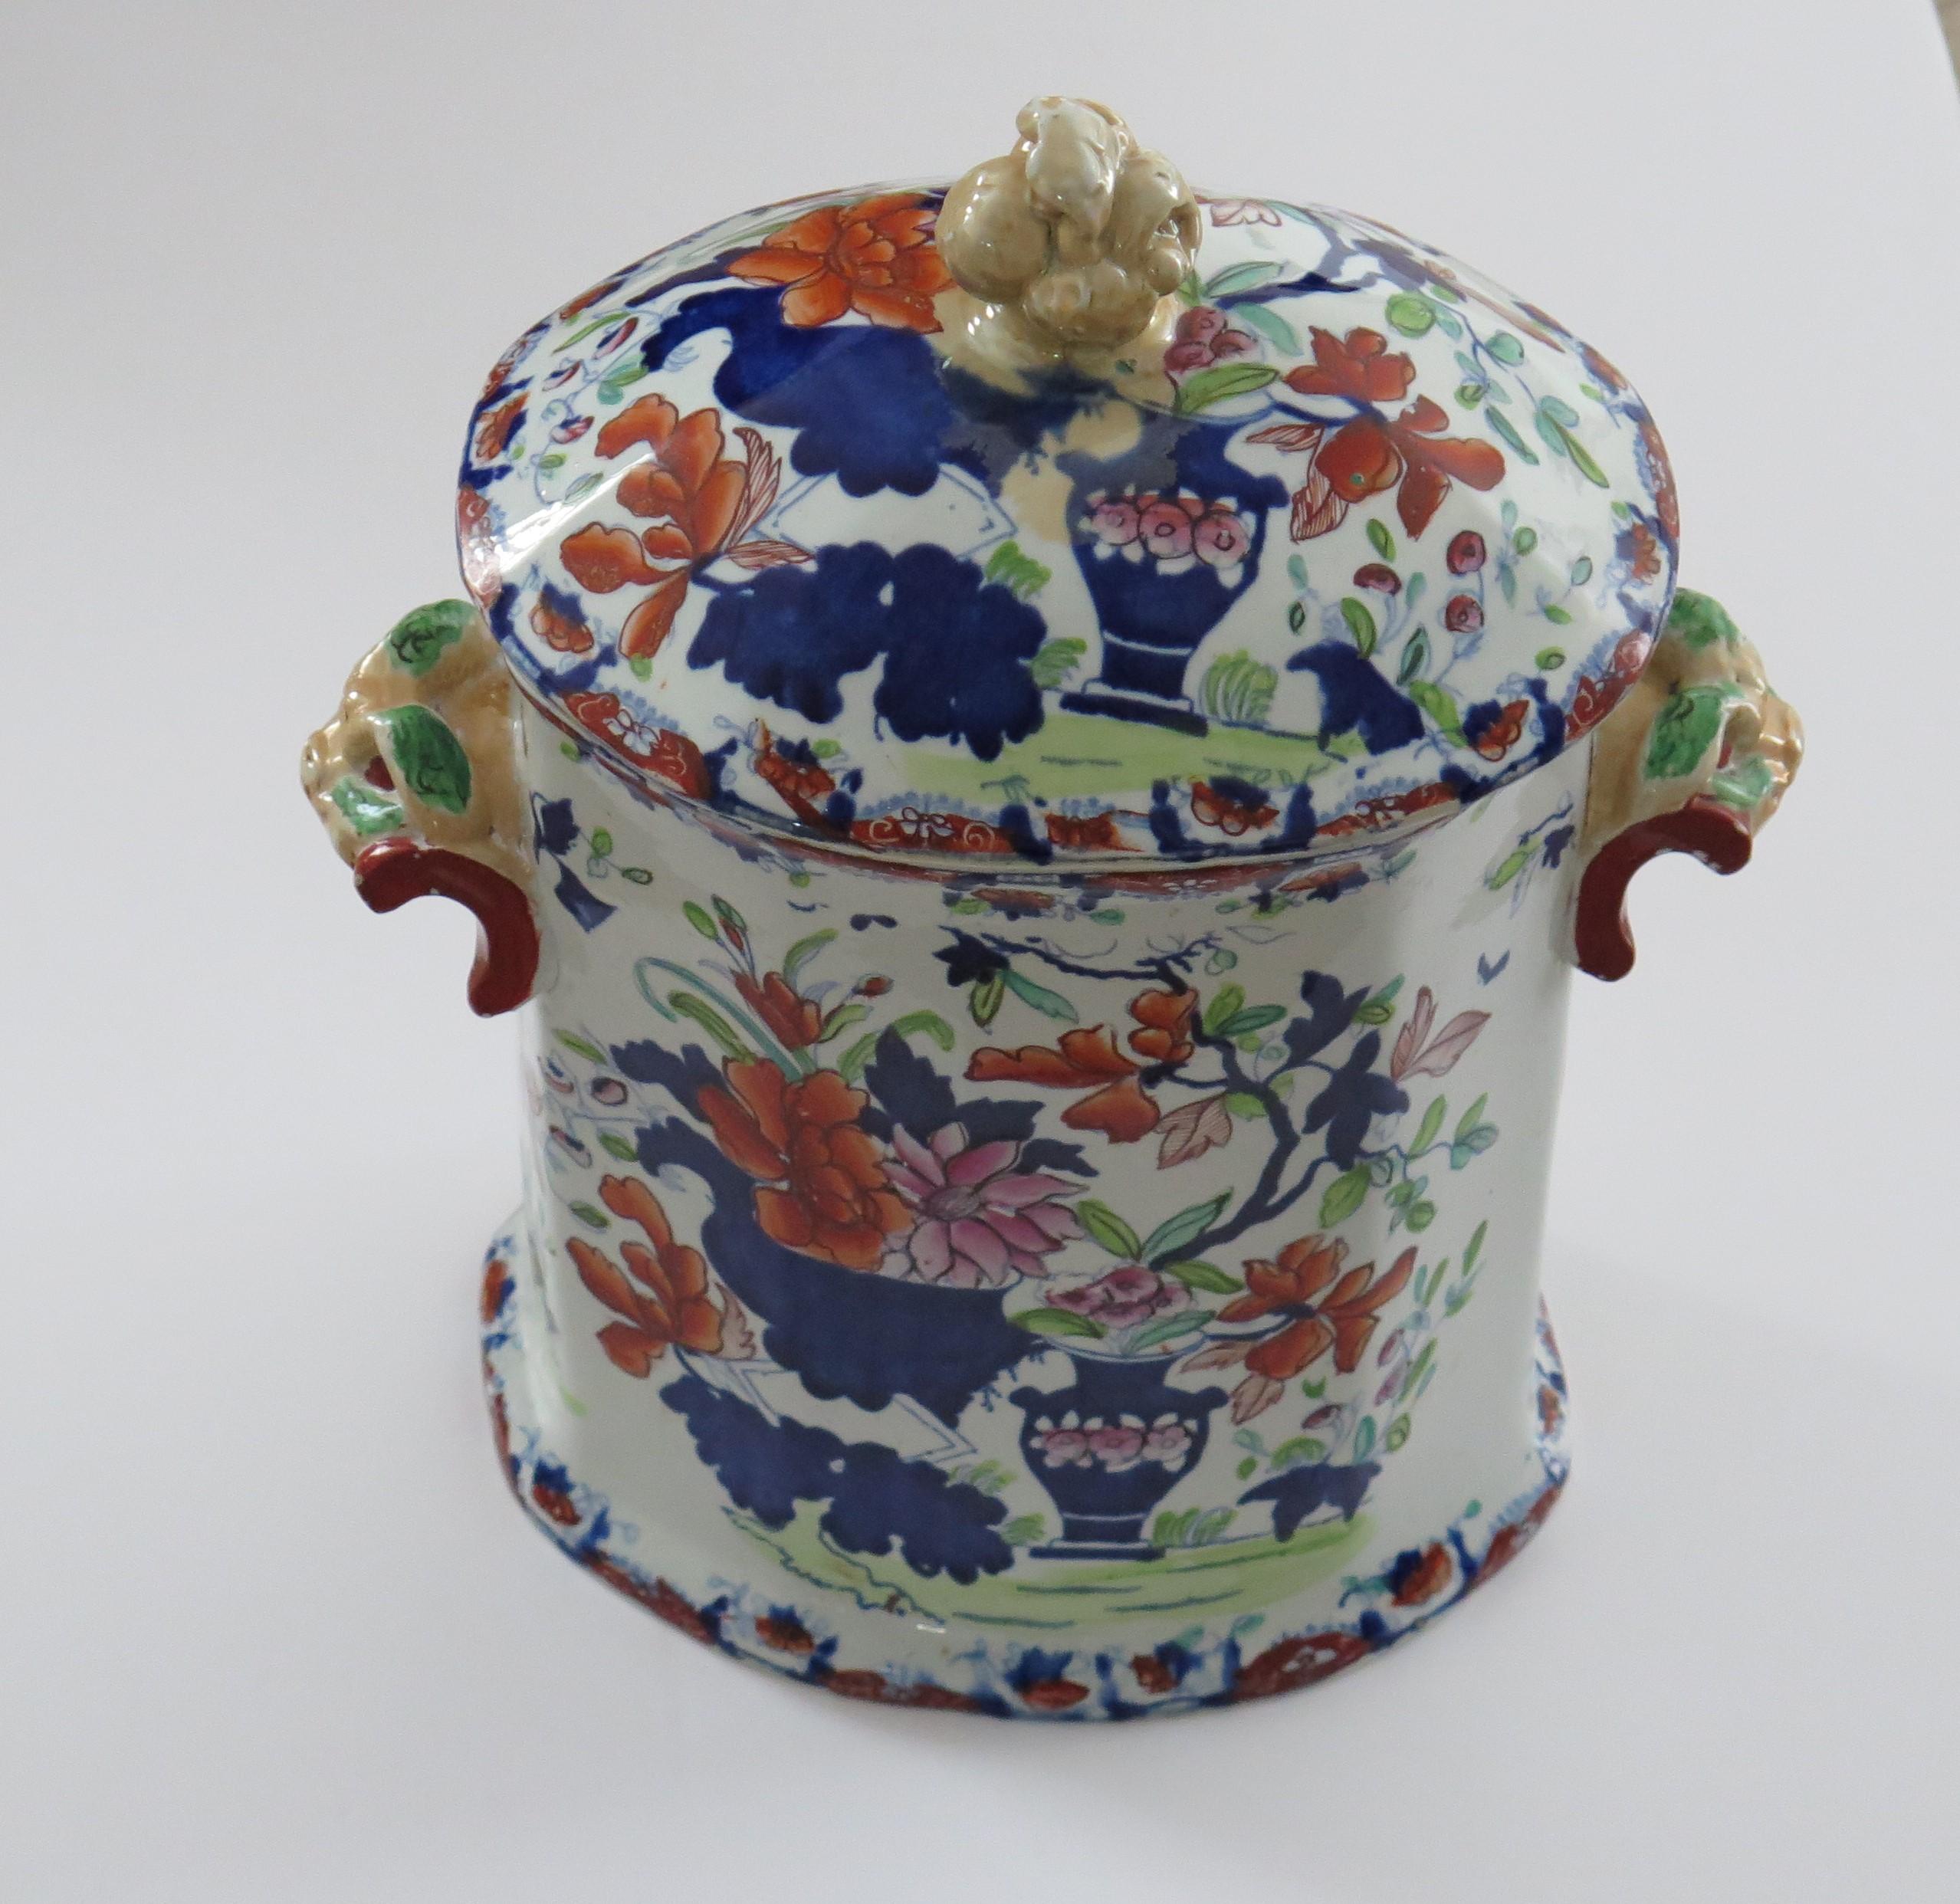 This is a rare, large Dough or Bread Bin,  decorated in the vase & jardiniere pattern, made by Masons Ironstone, of Lane Delph, Staffordshire, England, circa 1815.

This is a rare, substantial and well potted piece of octagonal section, having with